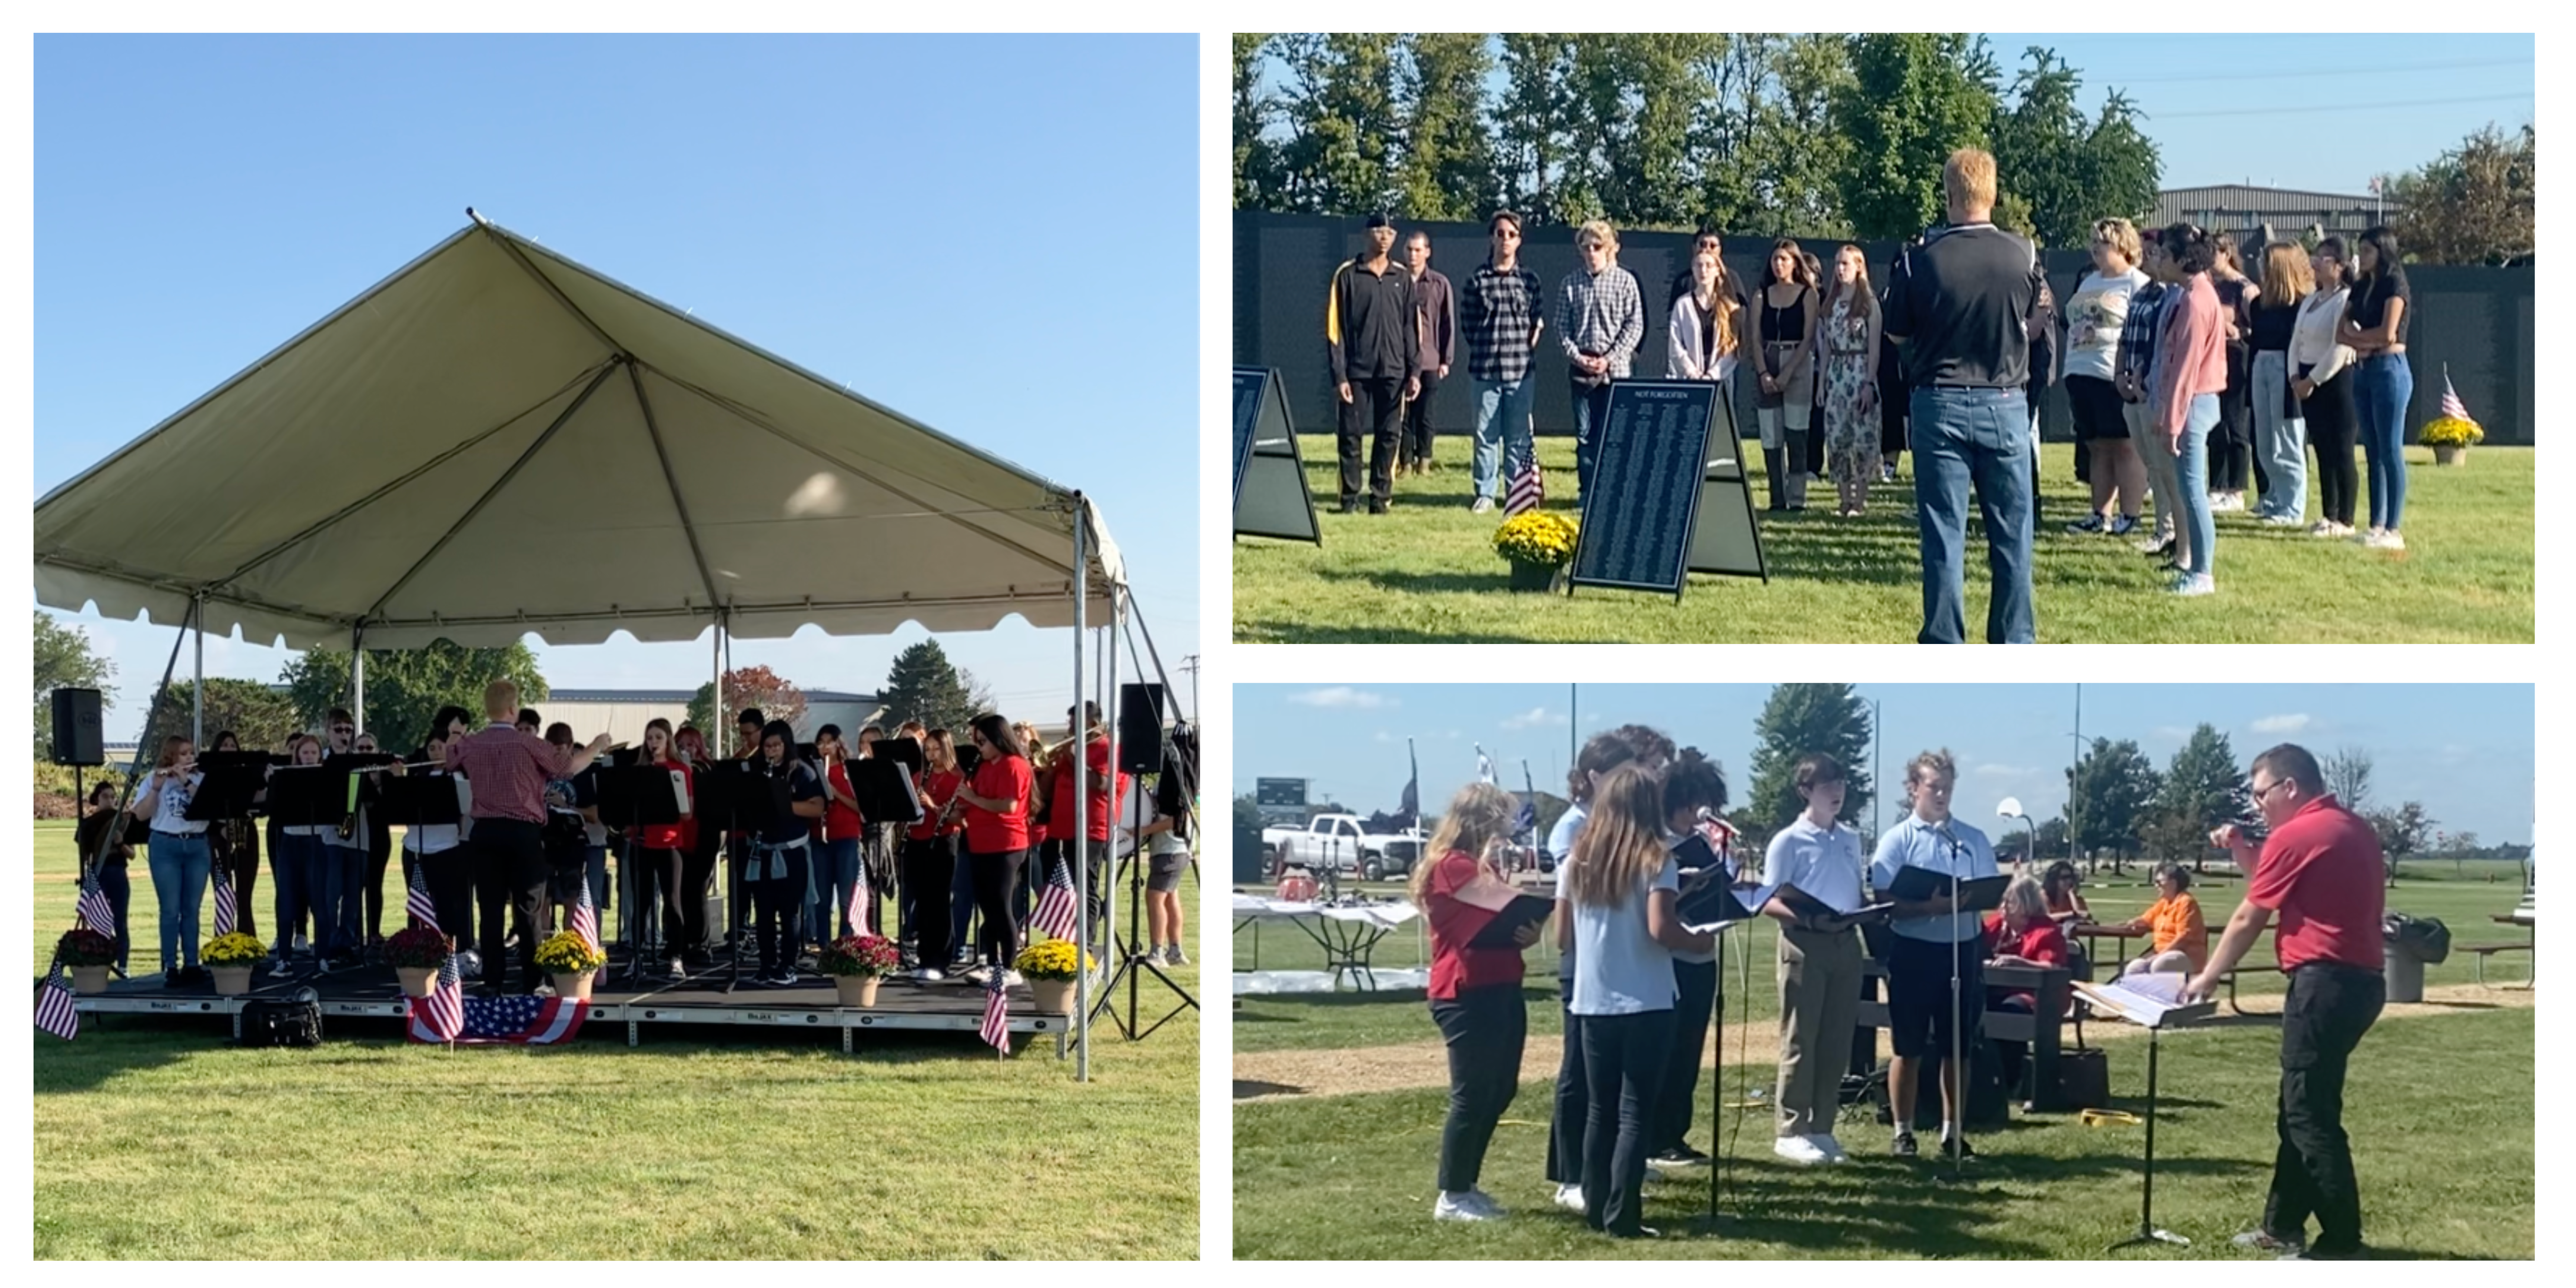 Harvard High School Band students (left) and Choir students (top right) as well as those from Marian Catholic High School Choir (bottom right) turn out to perform musical tributes throughout the weekend.